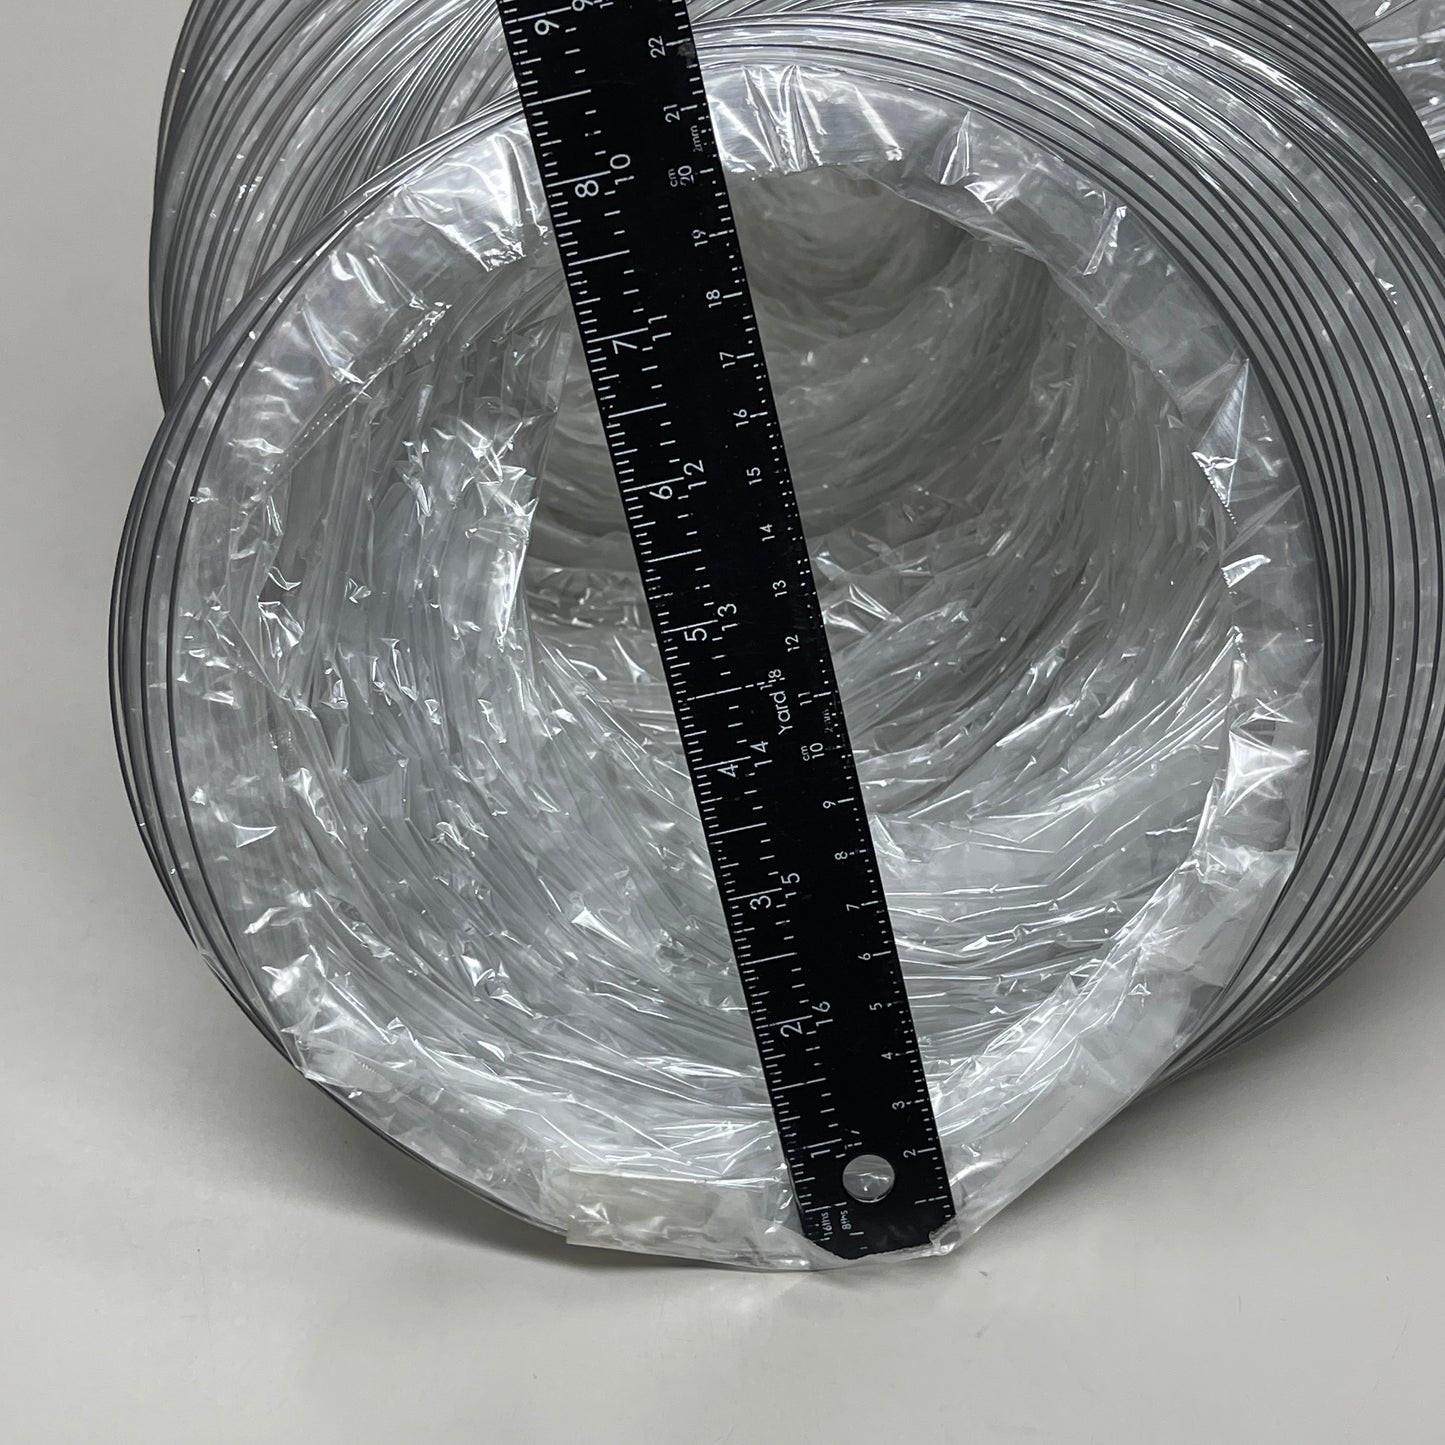 6-PACK! FLEX DUCT 8" x 25' Clear for HVAC C825 (New)